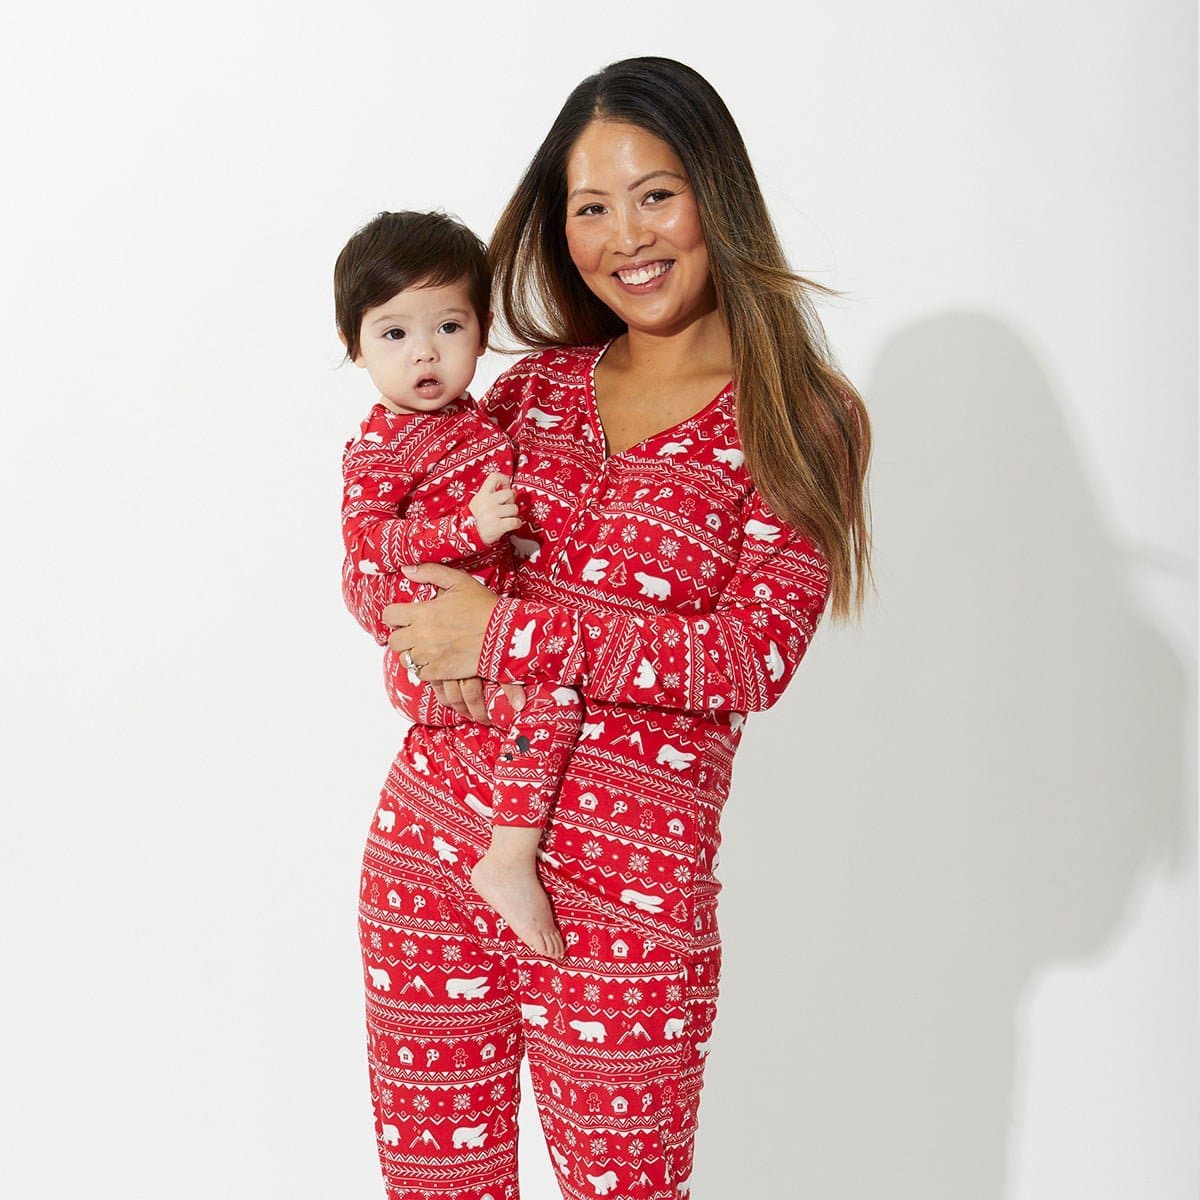 Evergreen Holiday Bundle - Bamboo Convertible Footie